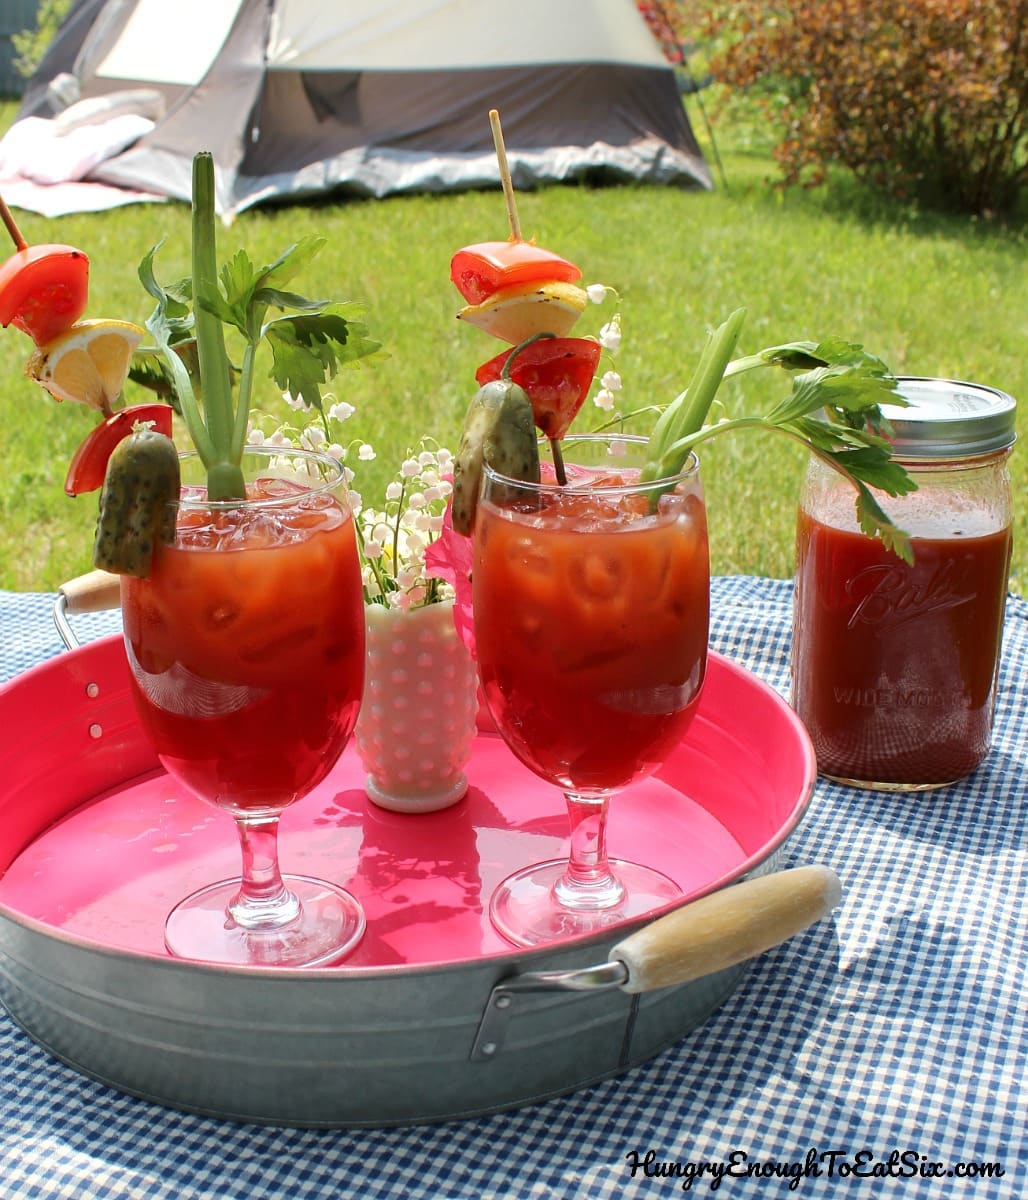 Tray with two bloody mary drinks